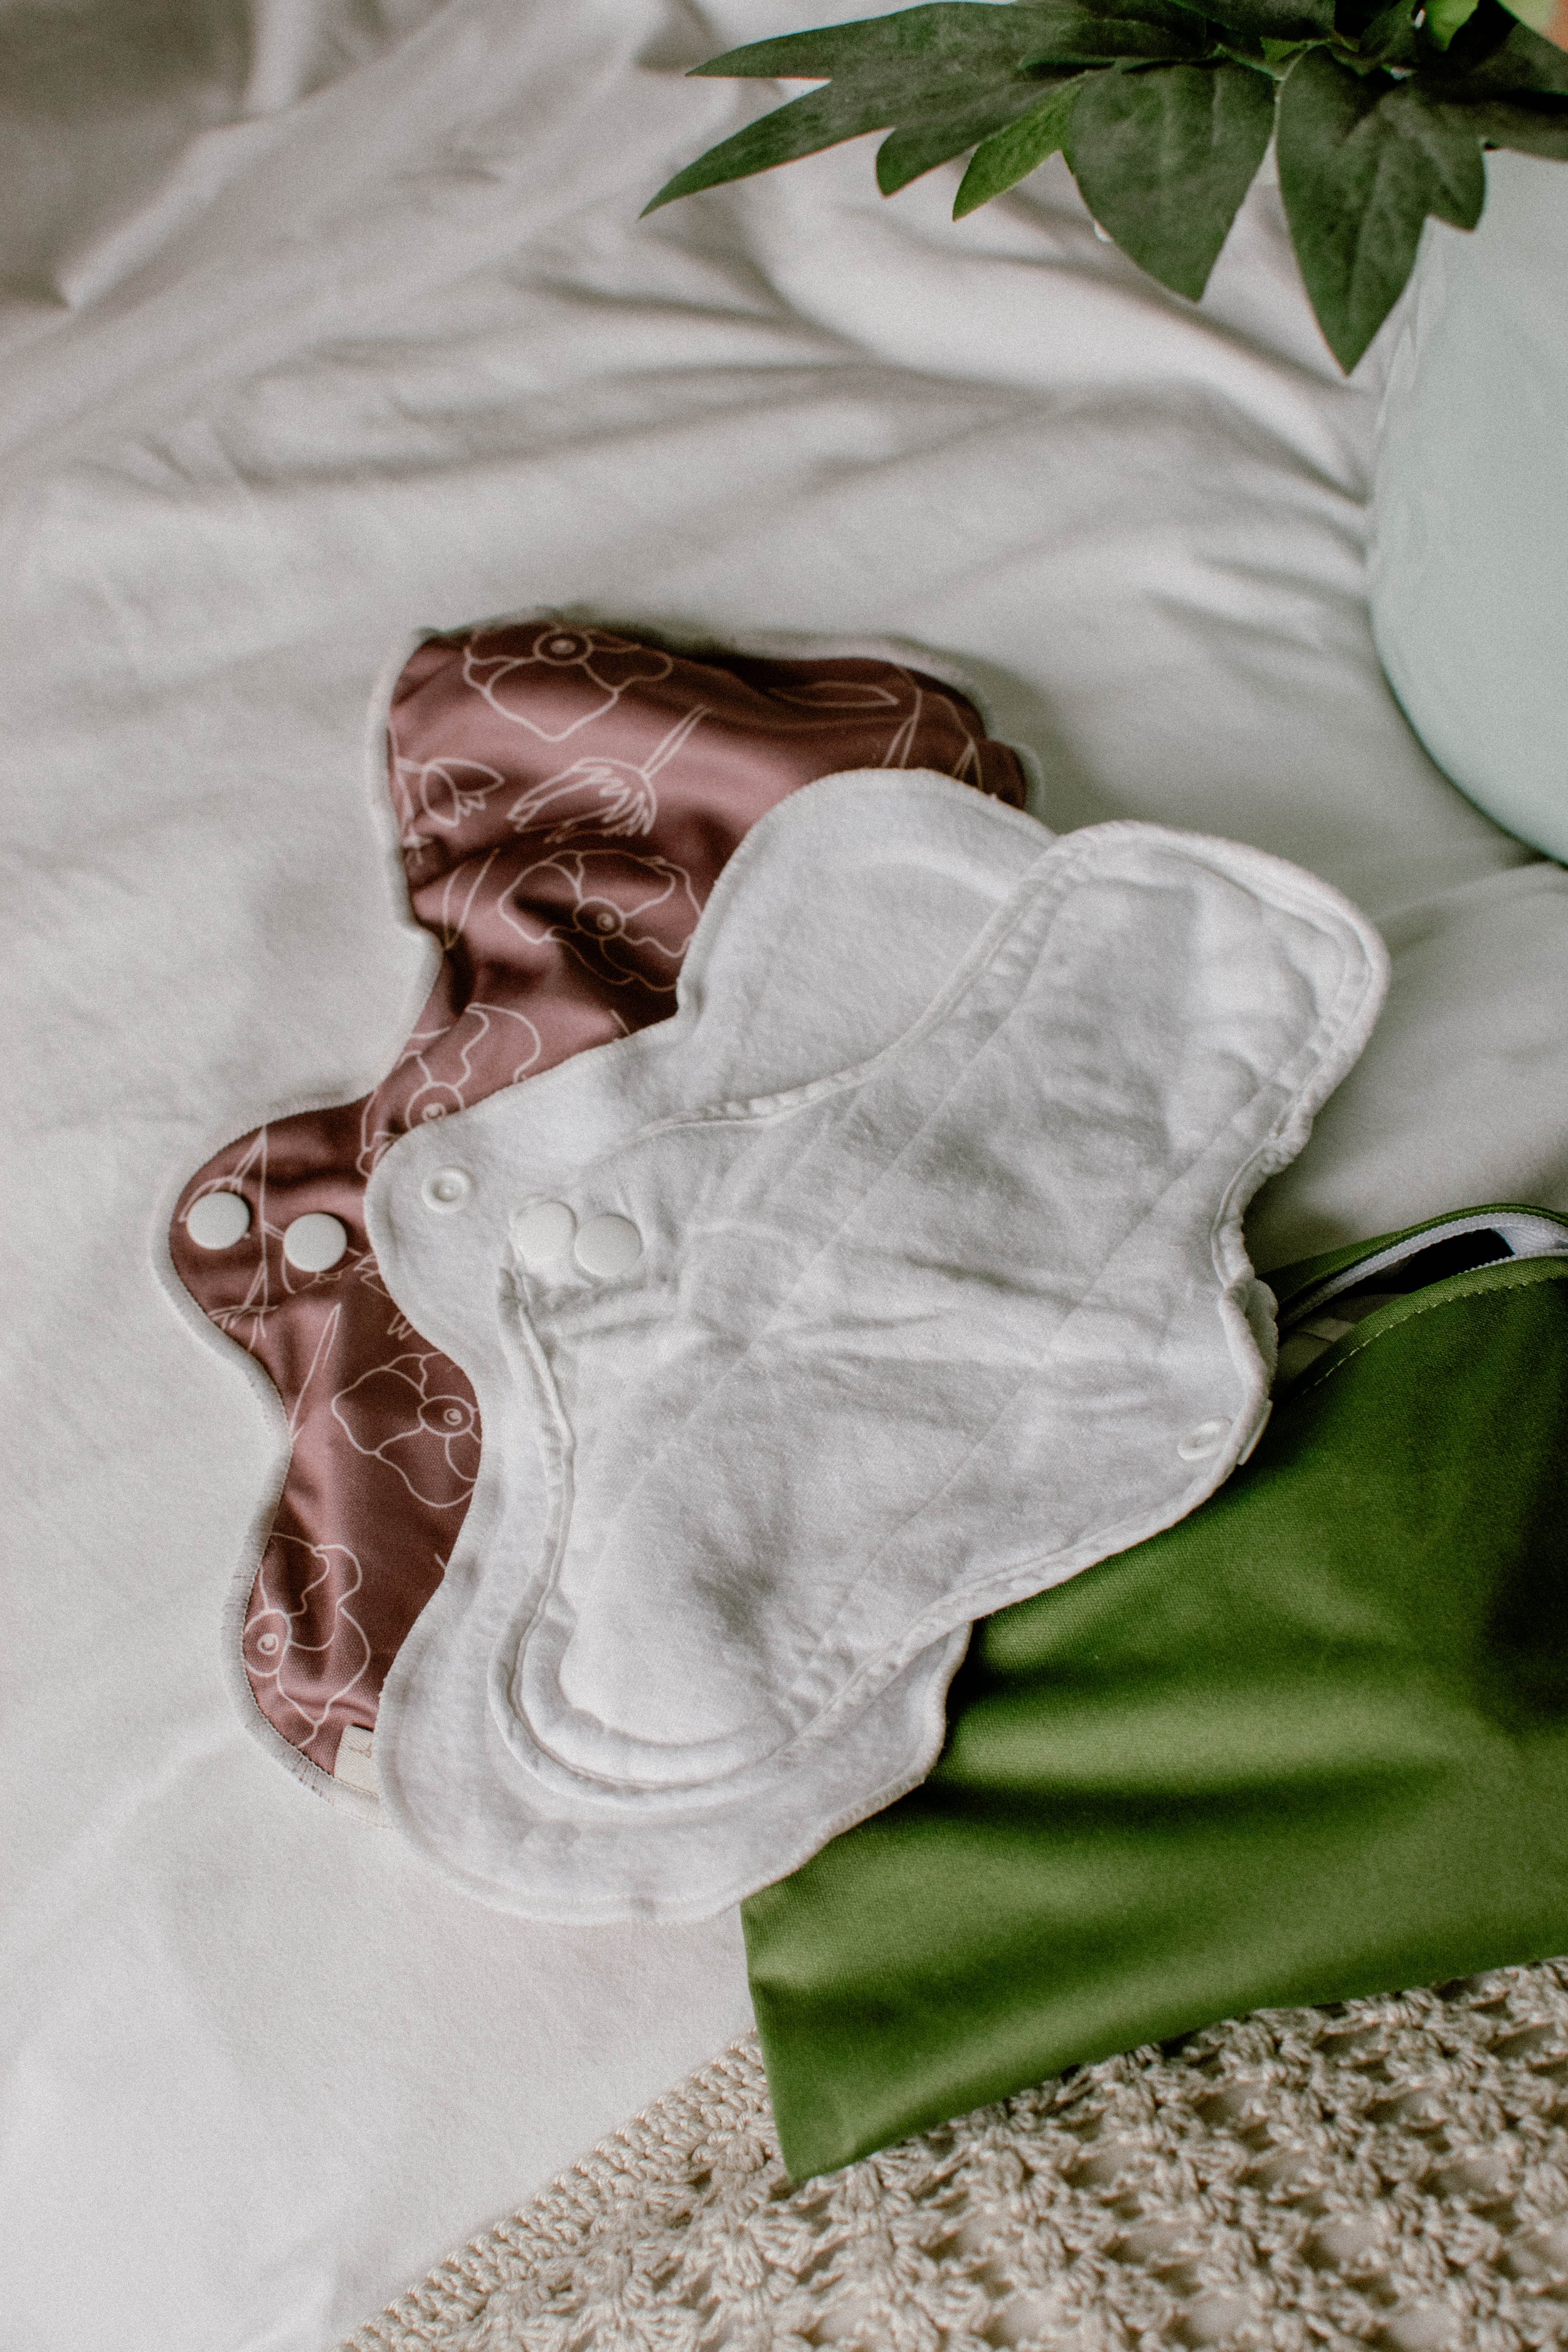 How to Have an Eco-Friendly Period, Part 1 : Cloth Sanitary Pads